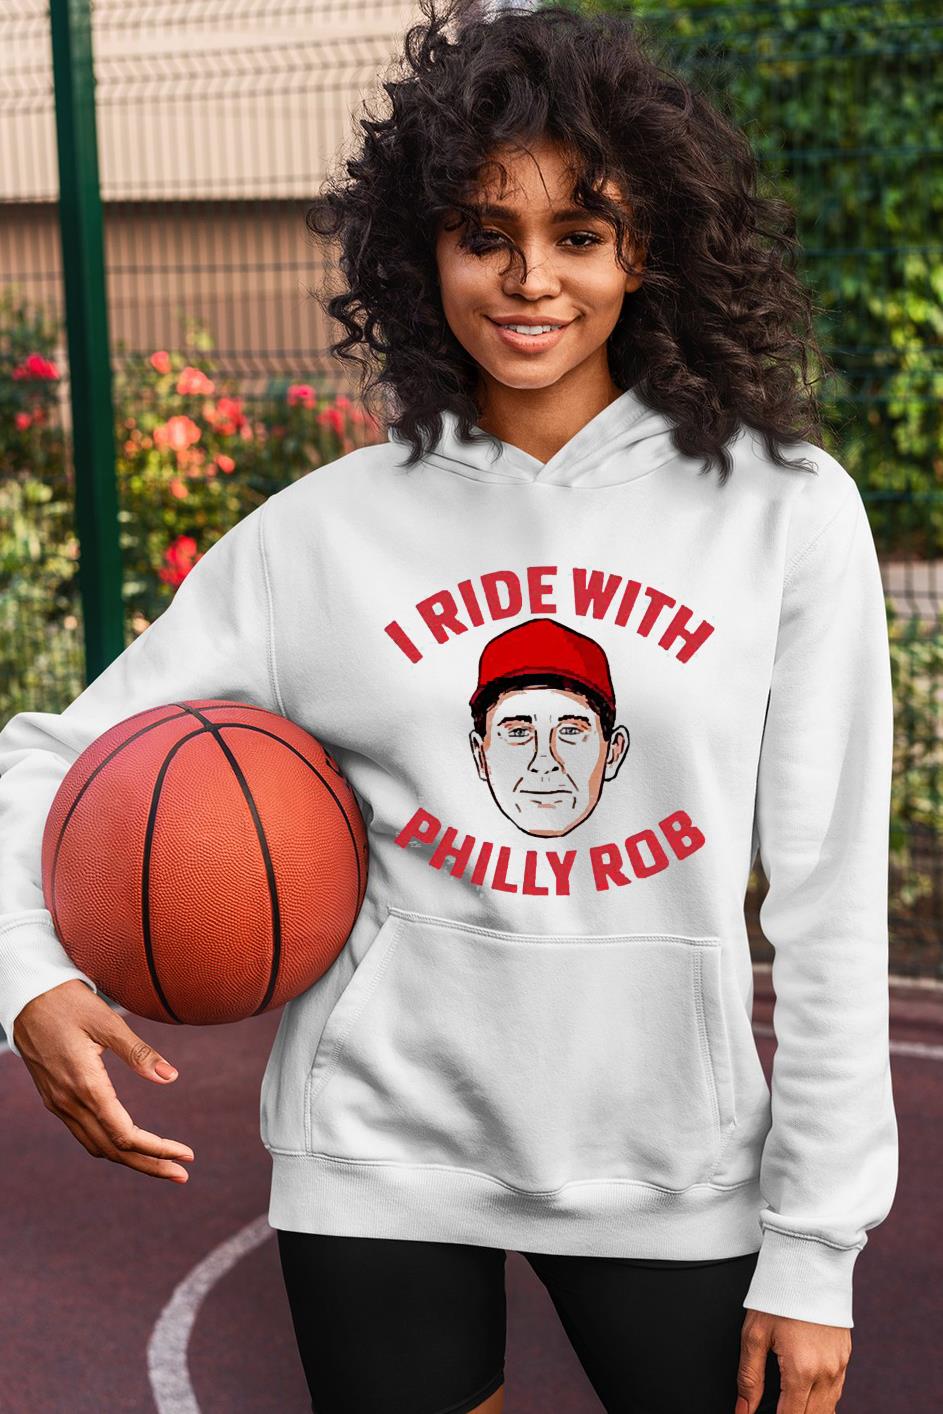 Rob Thomson I ride with Philly Rob shirt